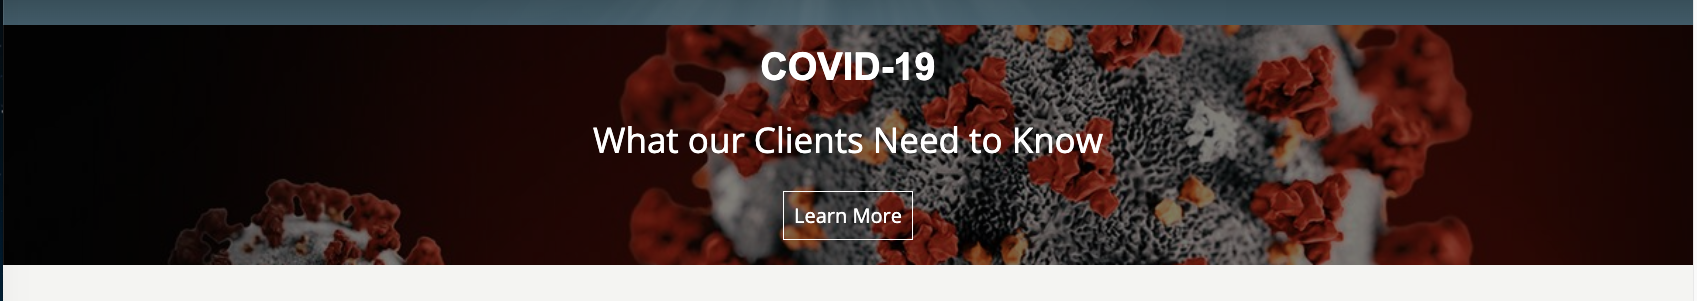 397-covid-19-banner-example.png